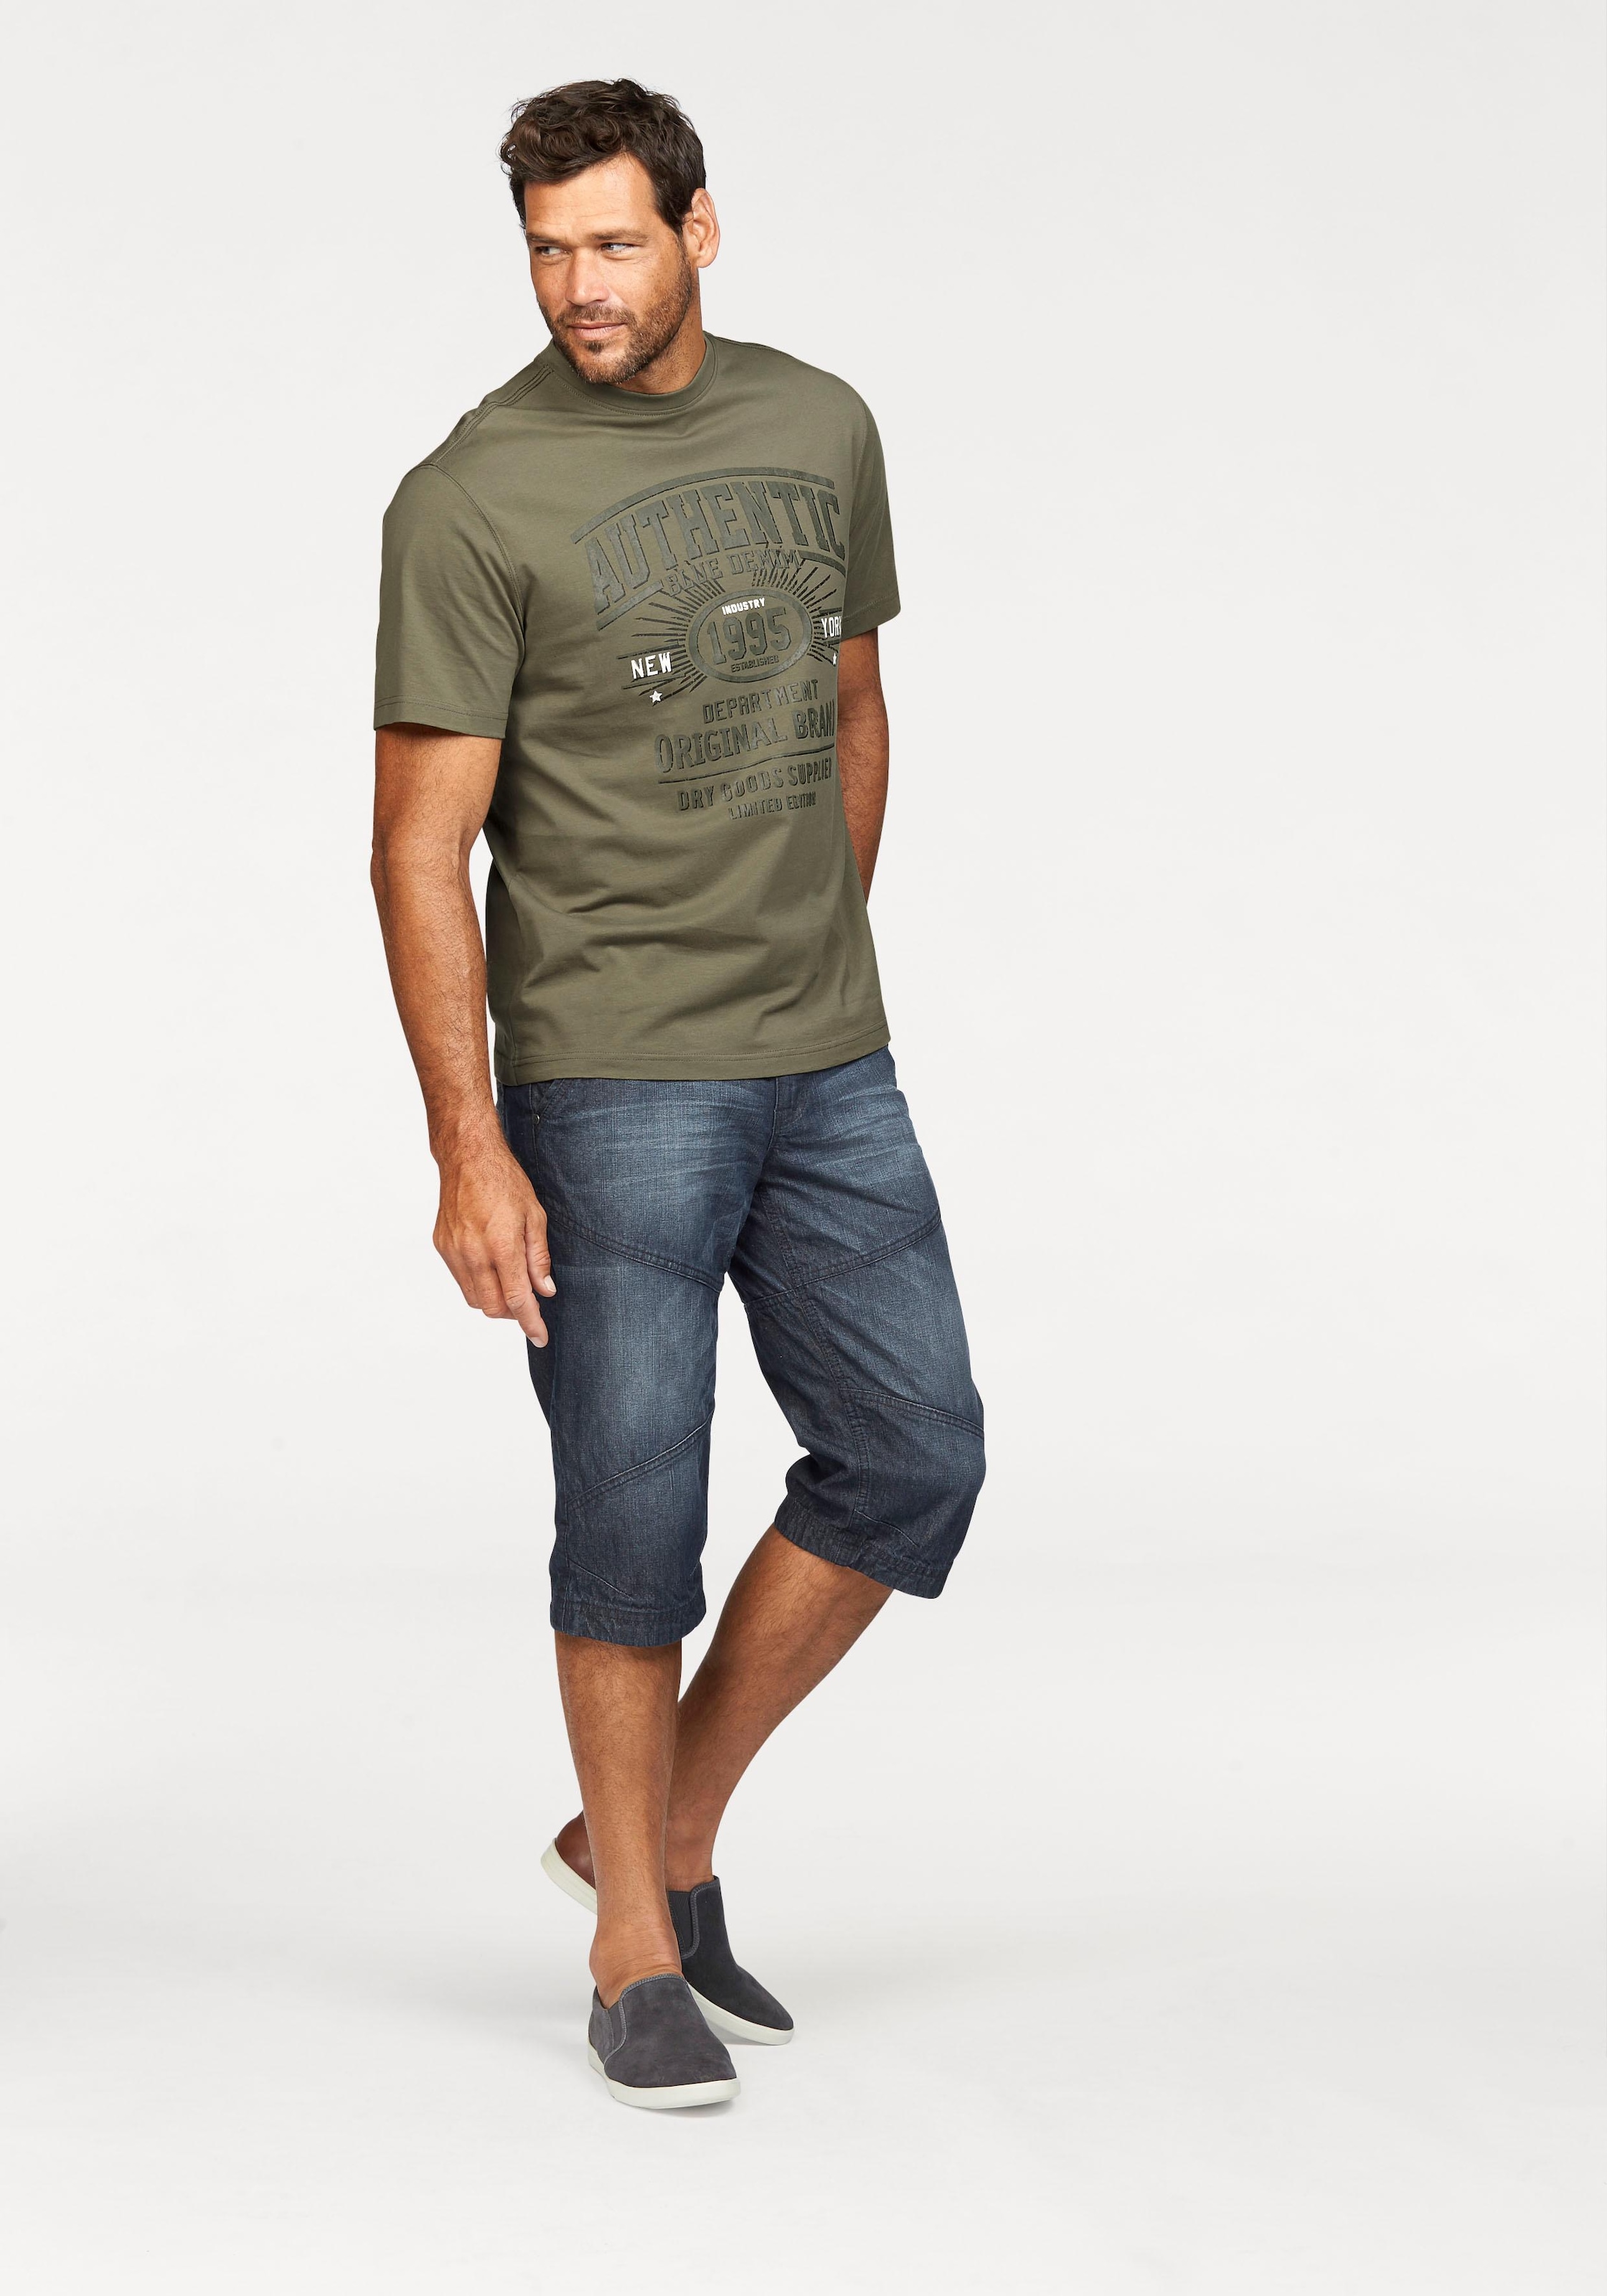 Man's World T-Shirt, bequemes Material in optimaler Passform